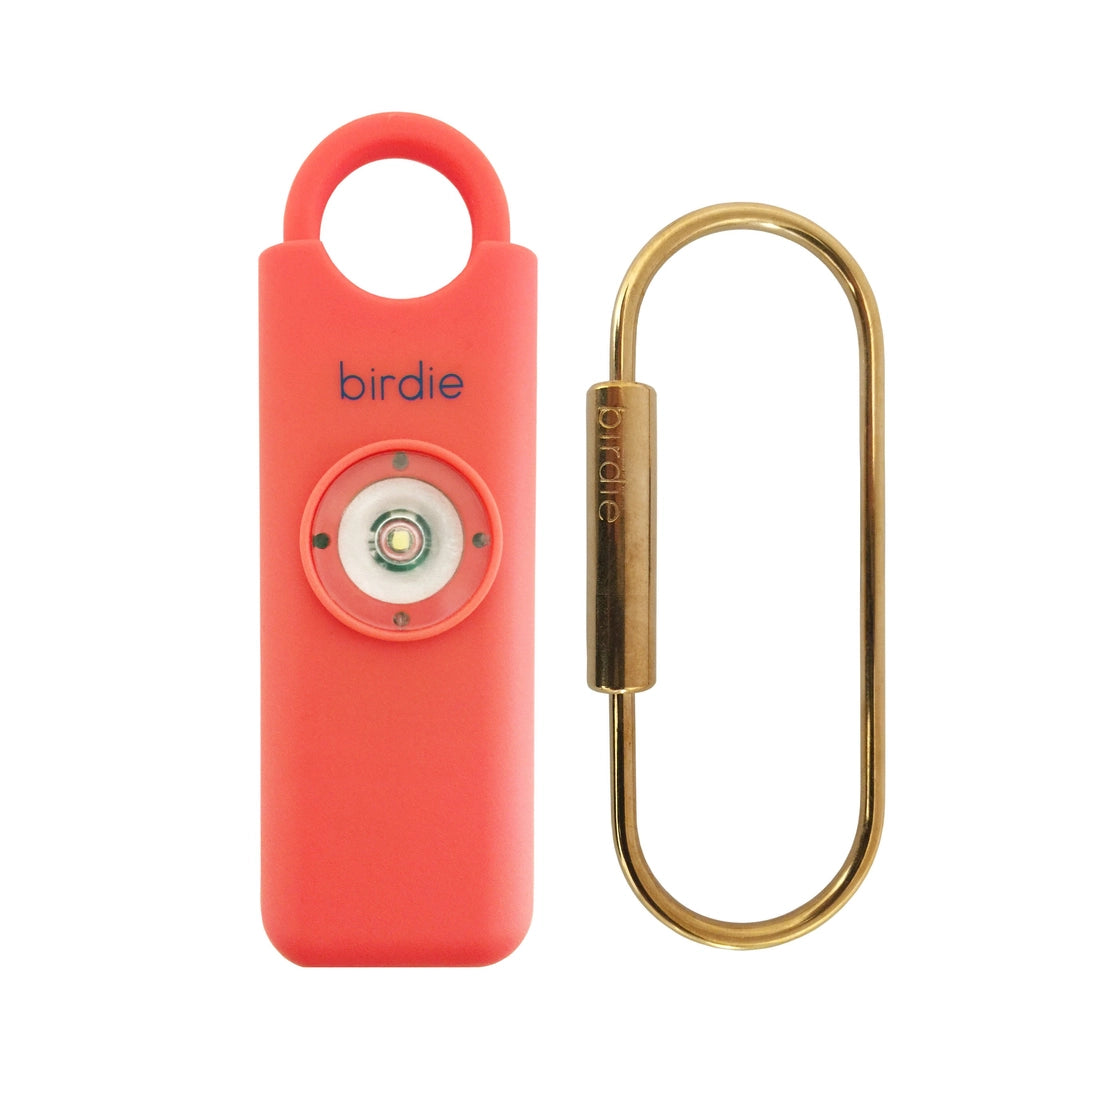 She's Birdie_ Personal Safety Alarm